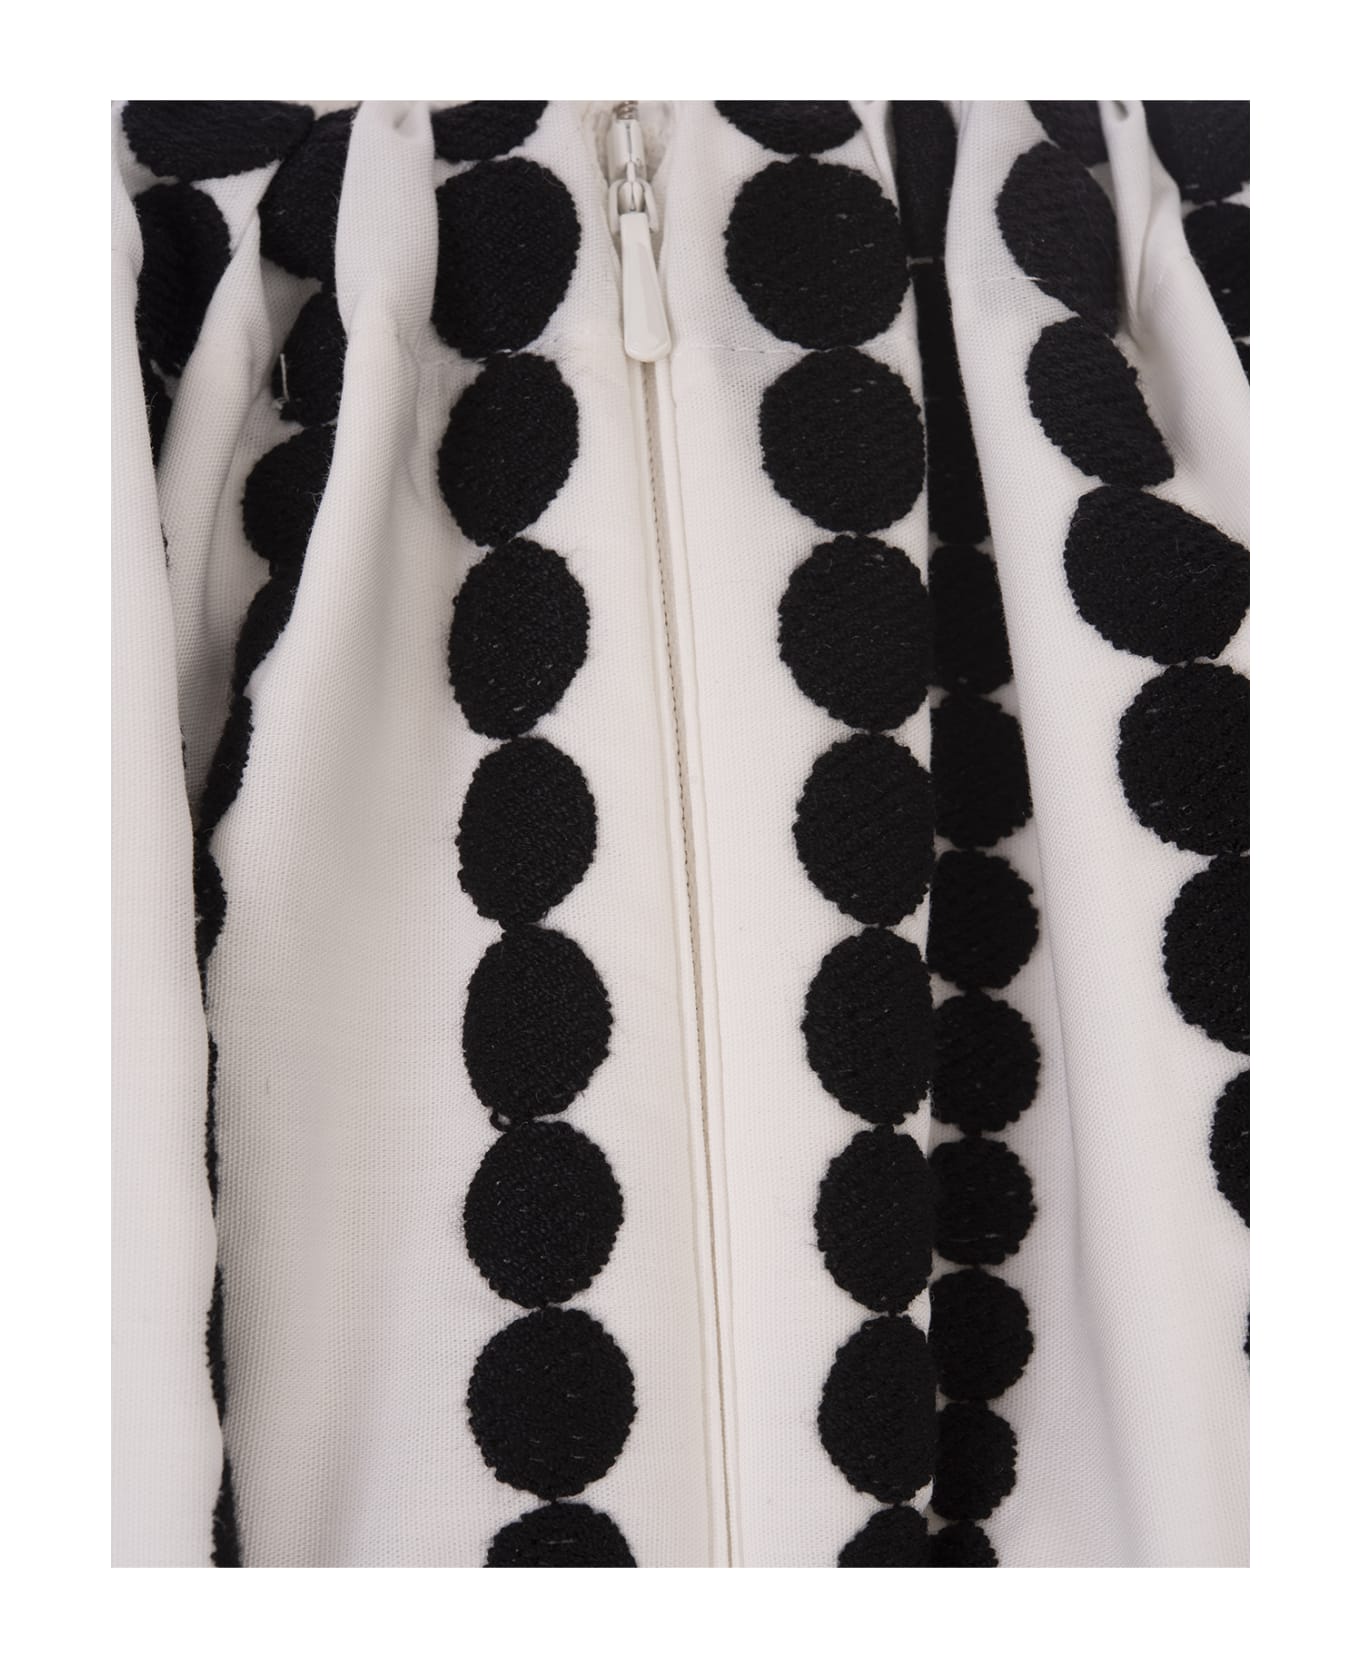 Elie Saab Moon Embroidered Poplin Dress In White And Black - White